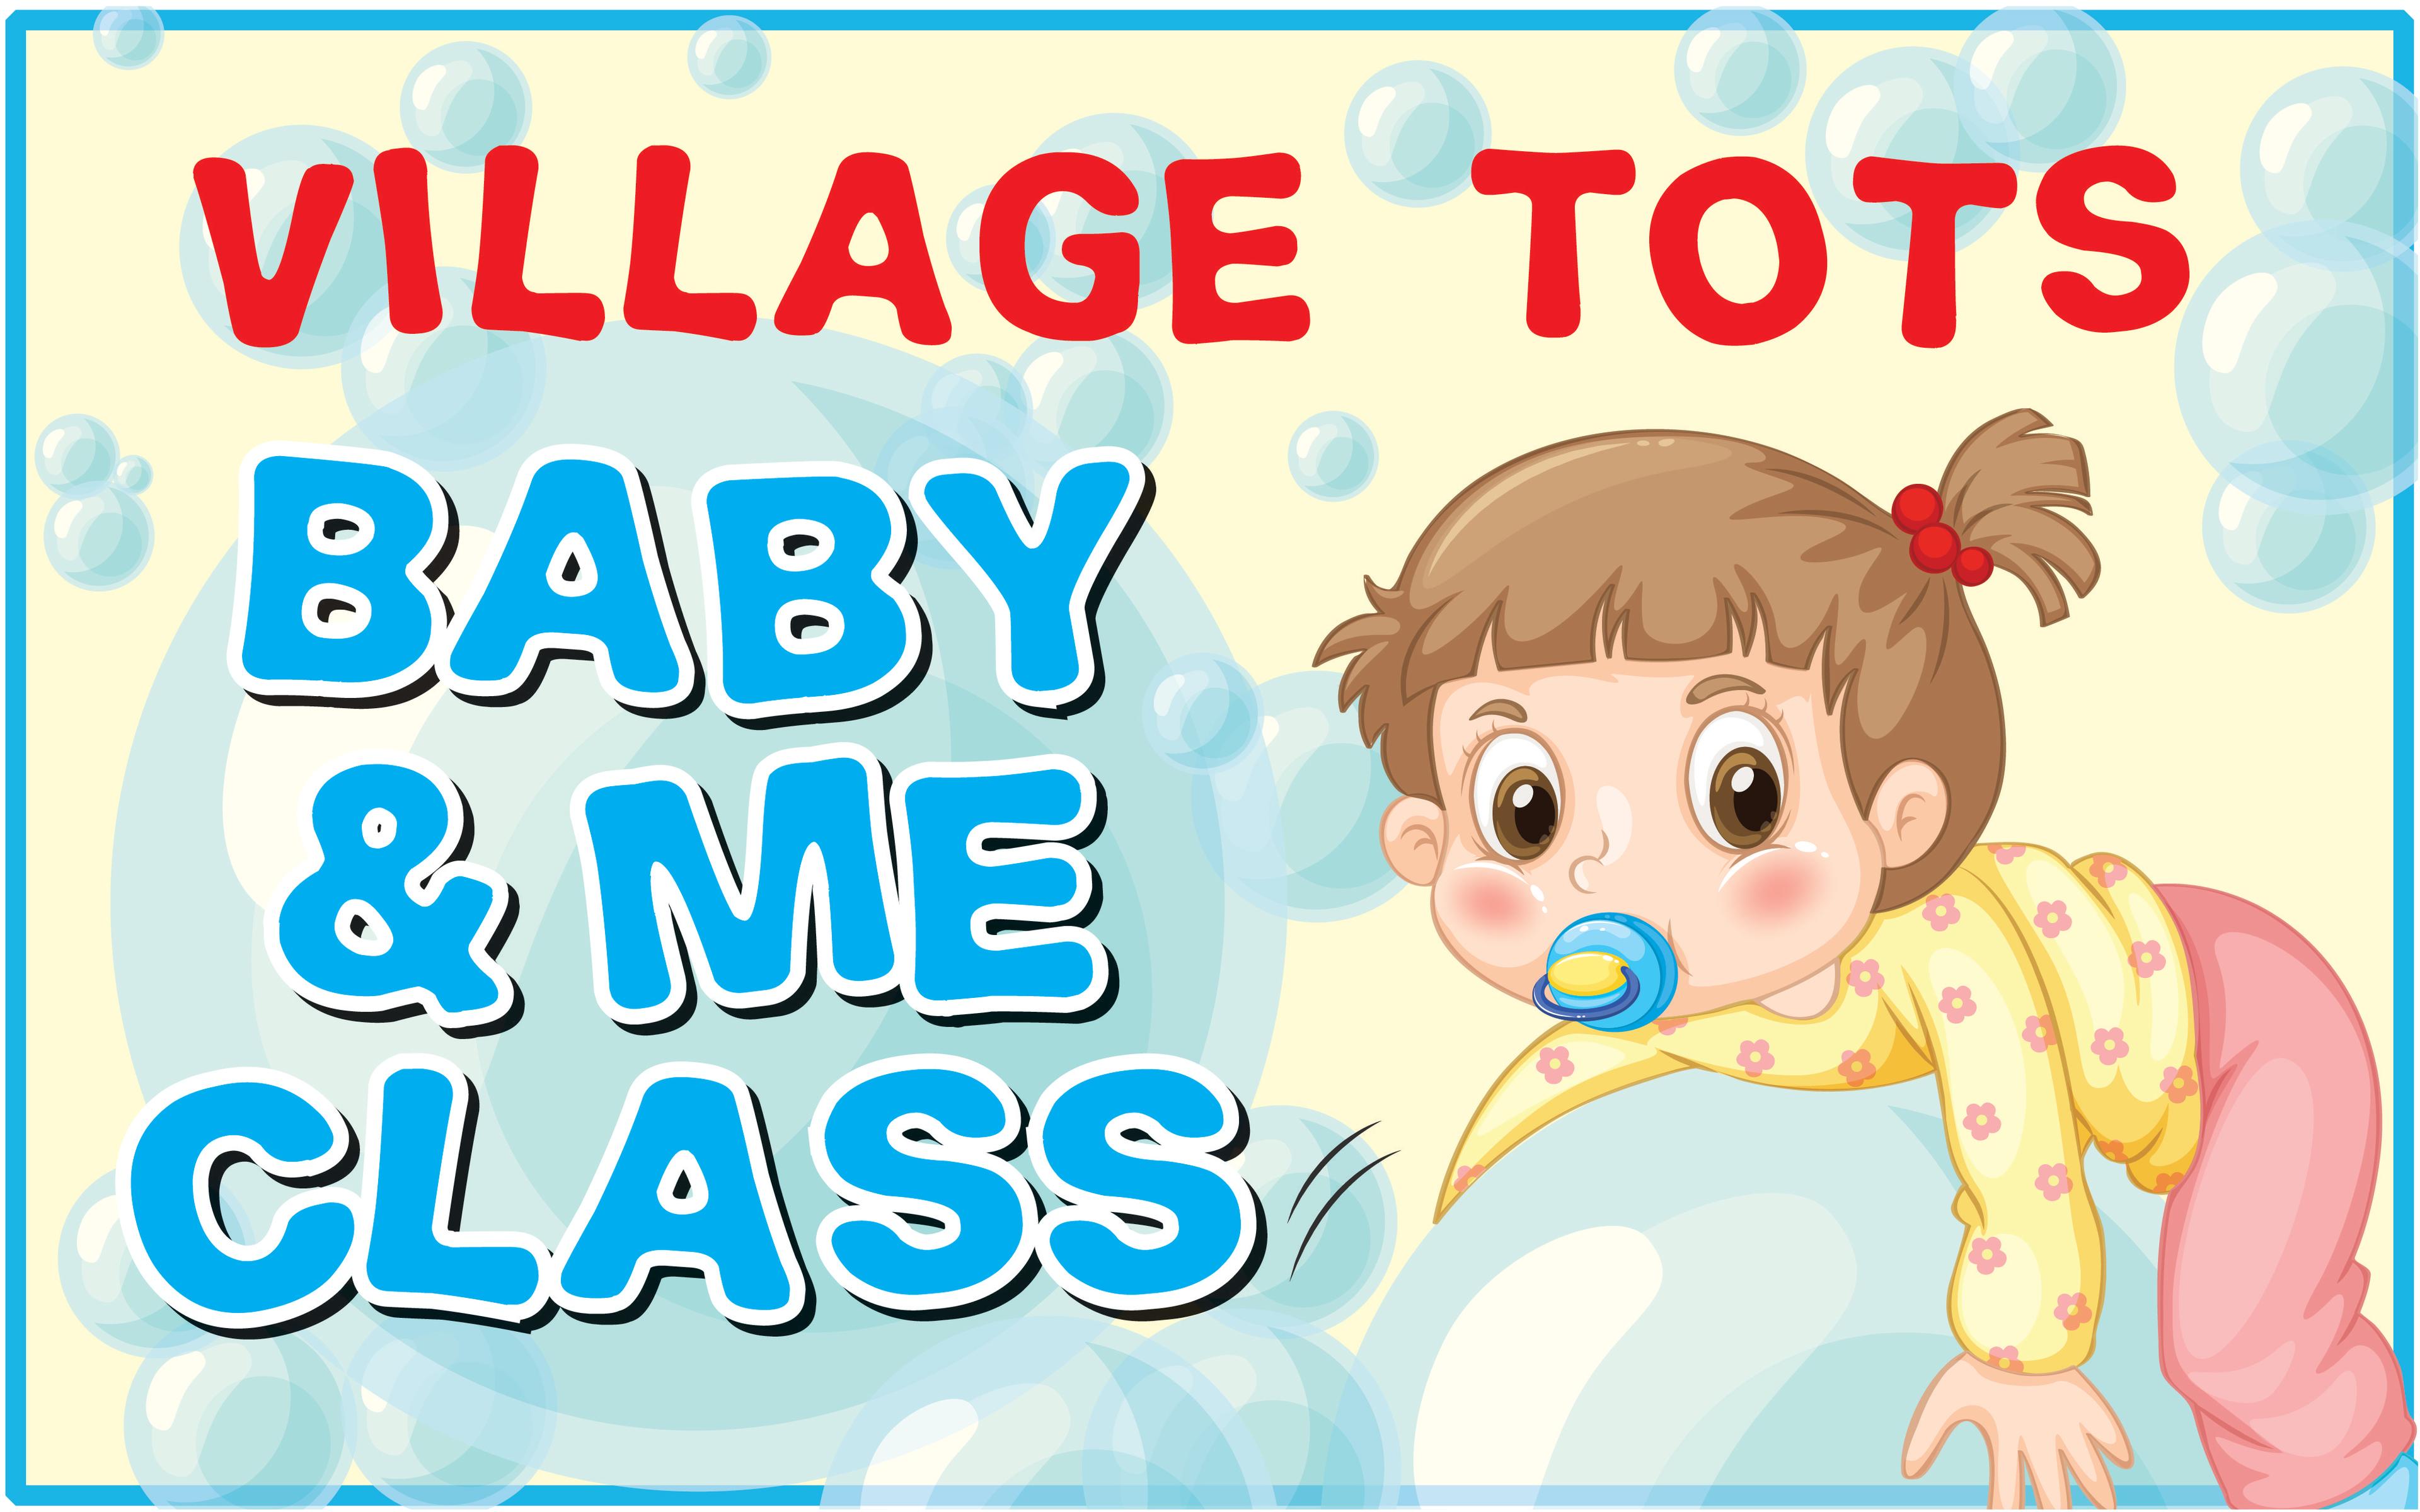 Village Tots Baby and Me Class